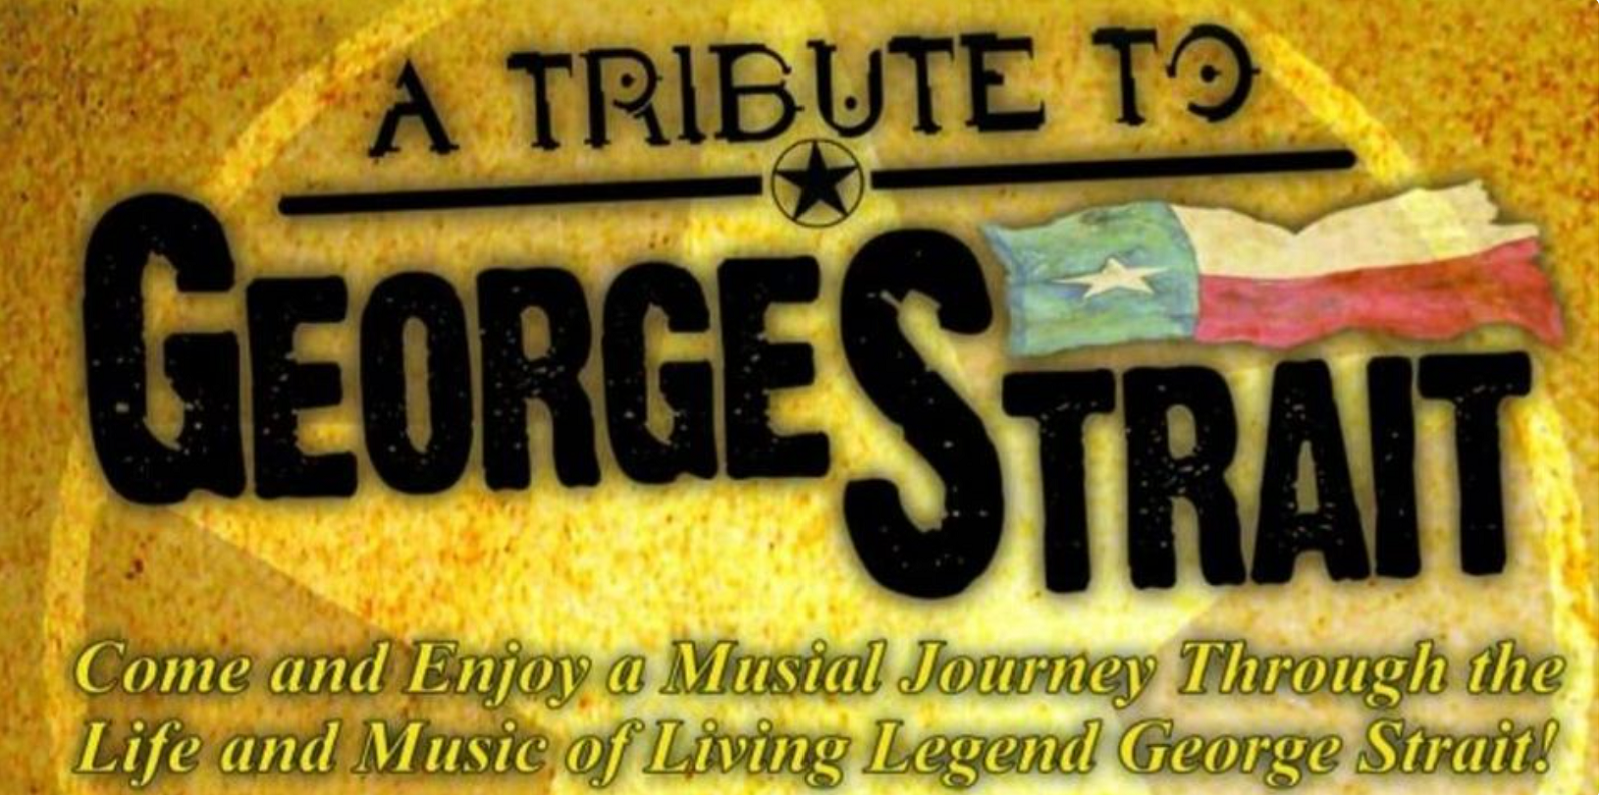 Get Your Tickets for the July 30th George Strait Tribute! This Fundraiser Keeps our Faulk County Transit Bus in Business! Photo